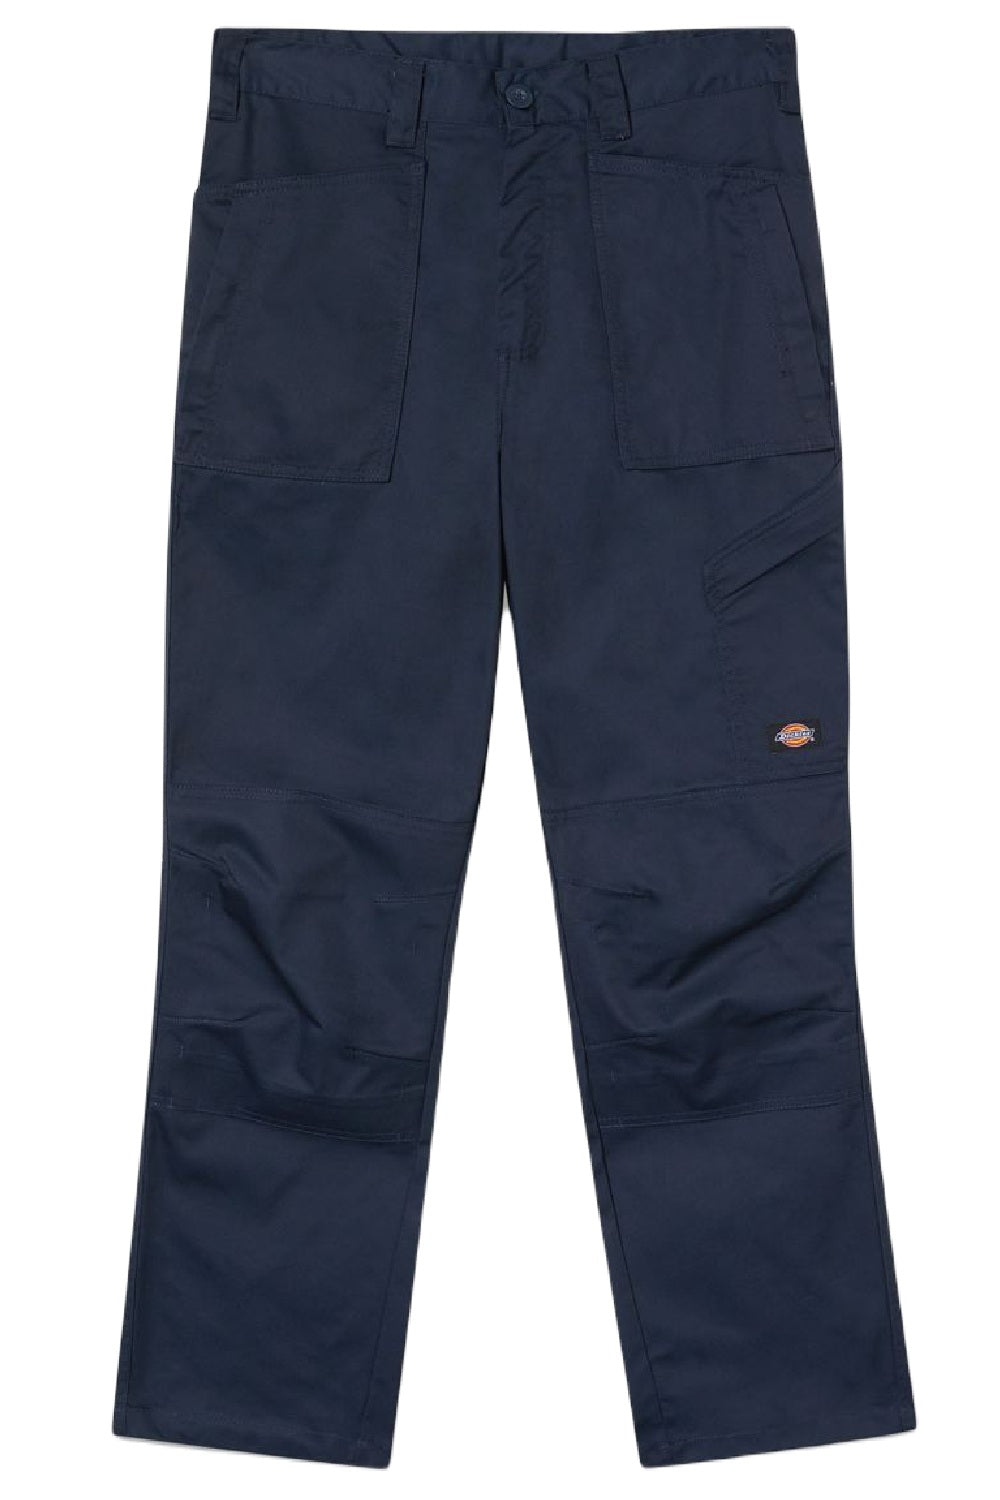 Dickies Action Flex Trousers in Navy Blue